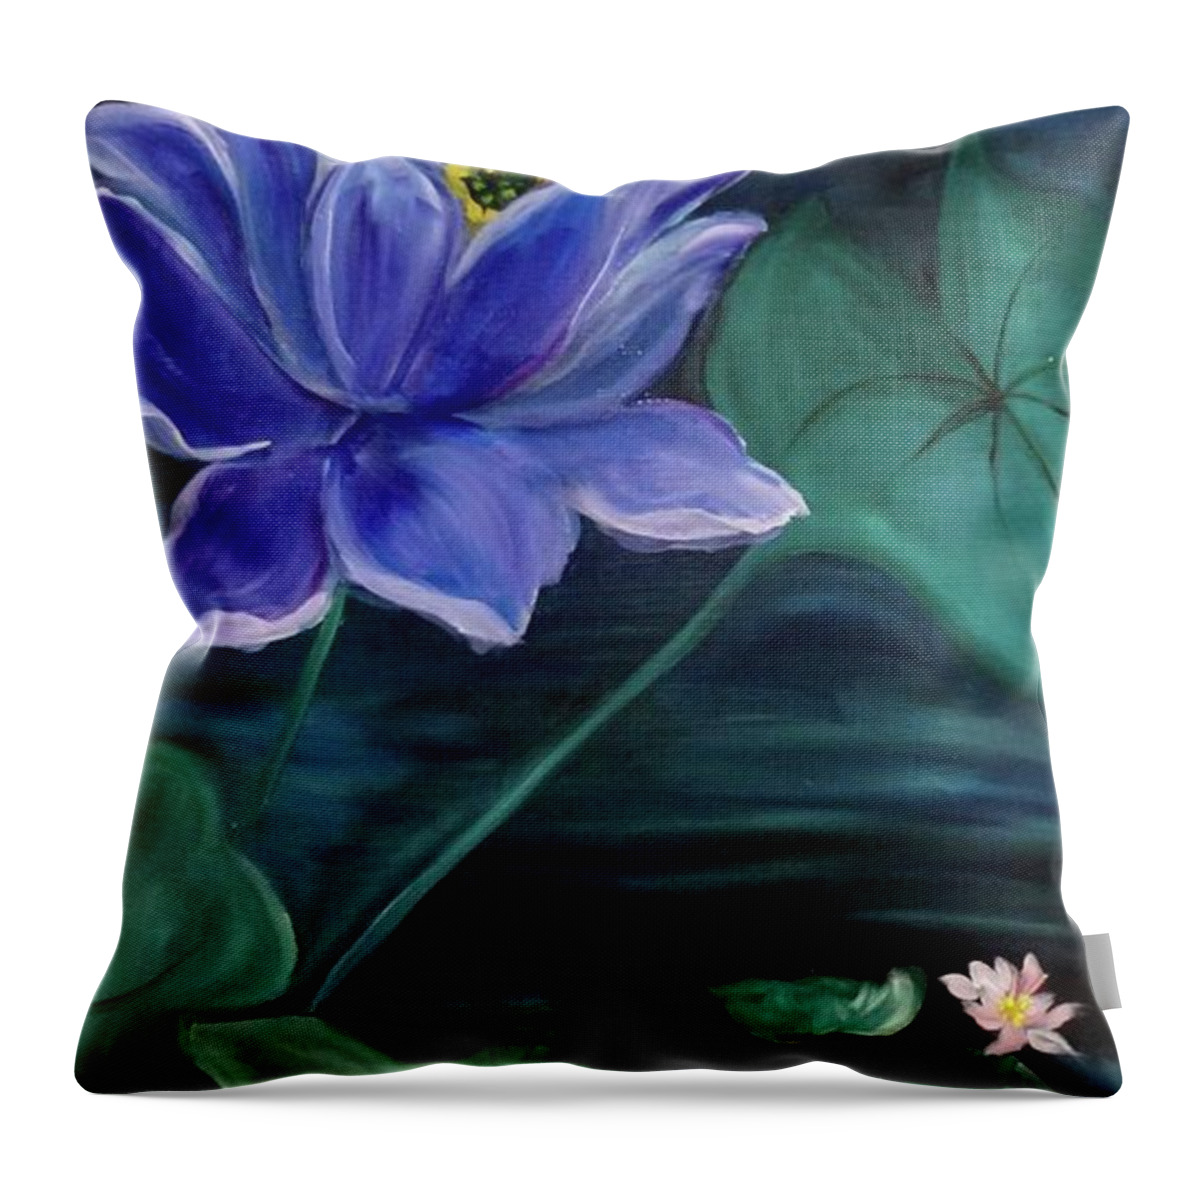 Lotus Blossom Throw Pillow featuring the painting Lotus by Jenny Lee